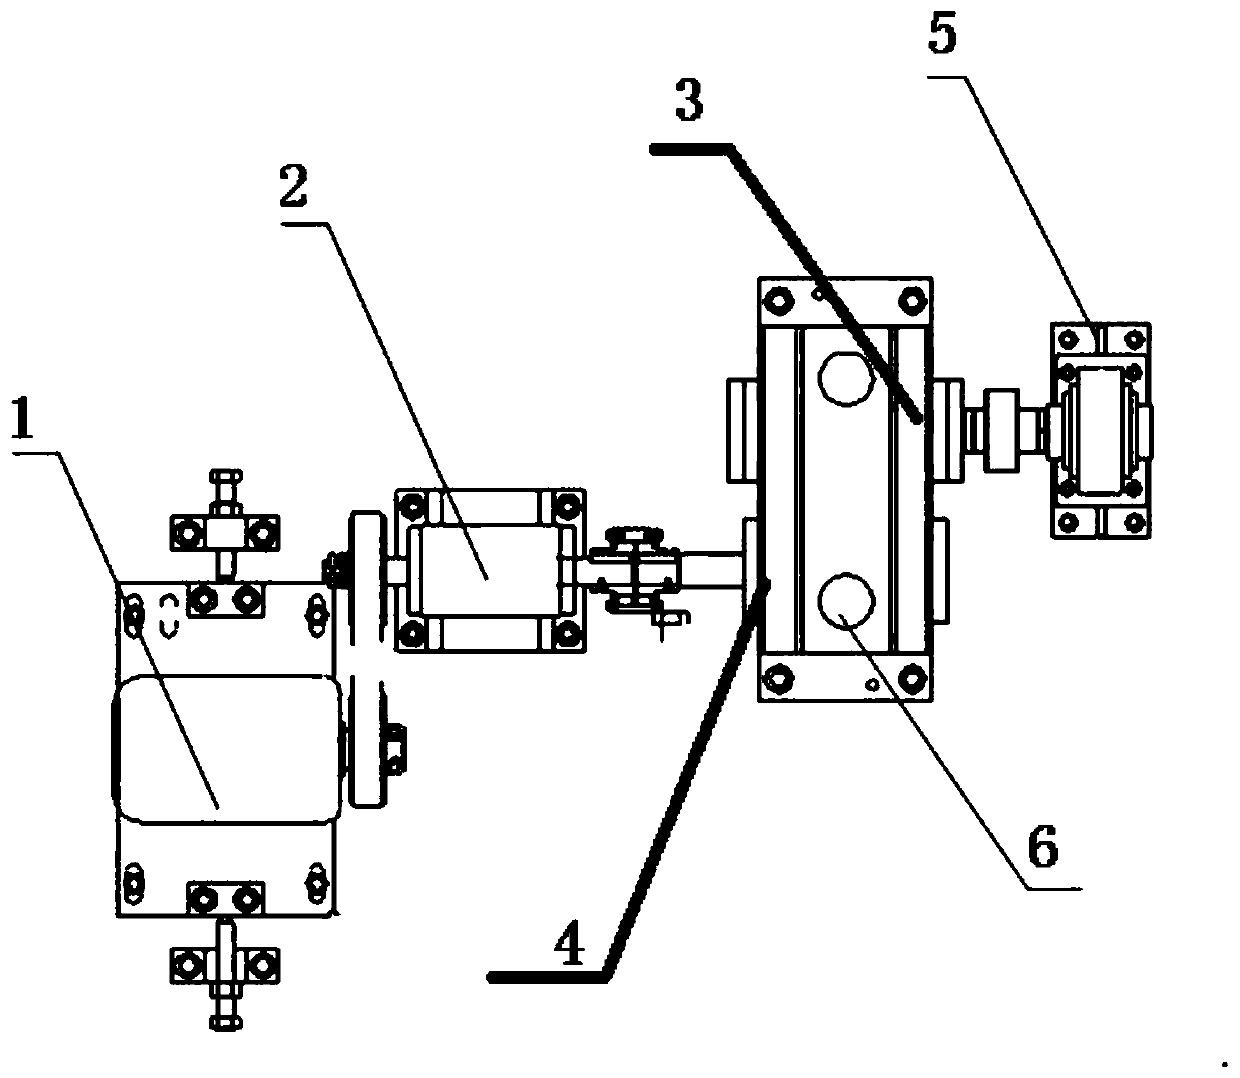 Gearbox fault diagnosis method based on multi-element modal decomposition-transfer entropy